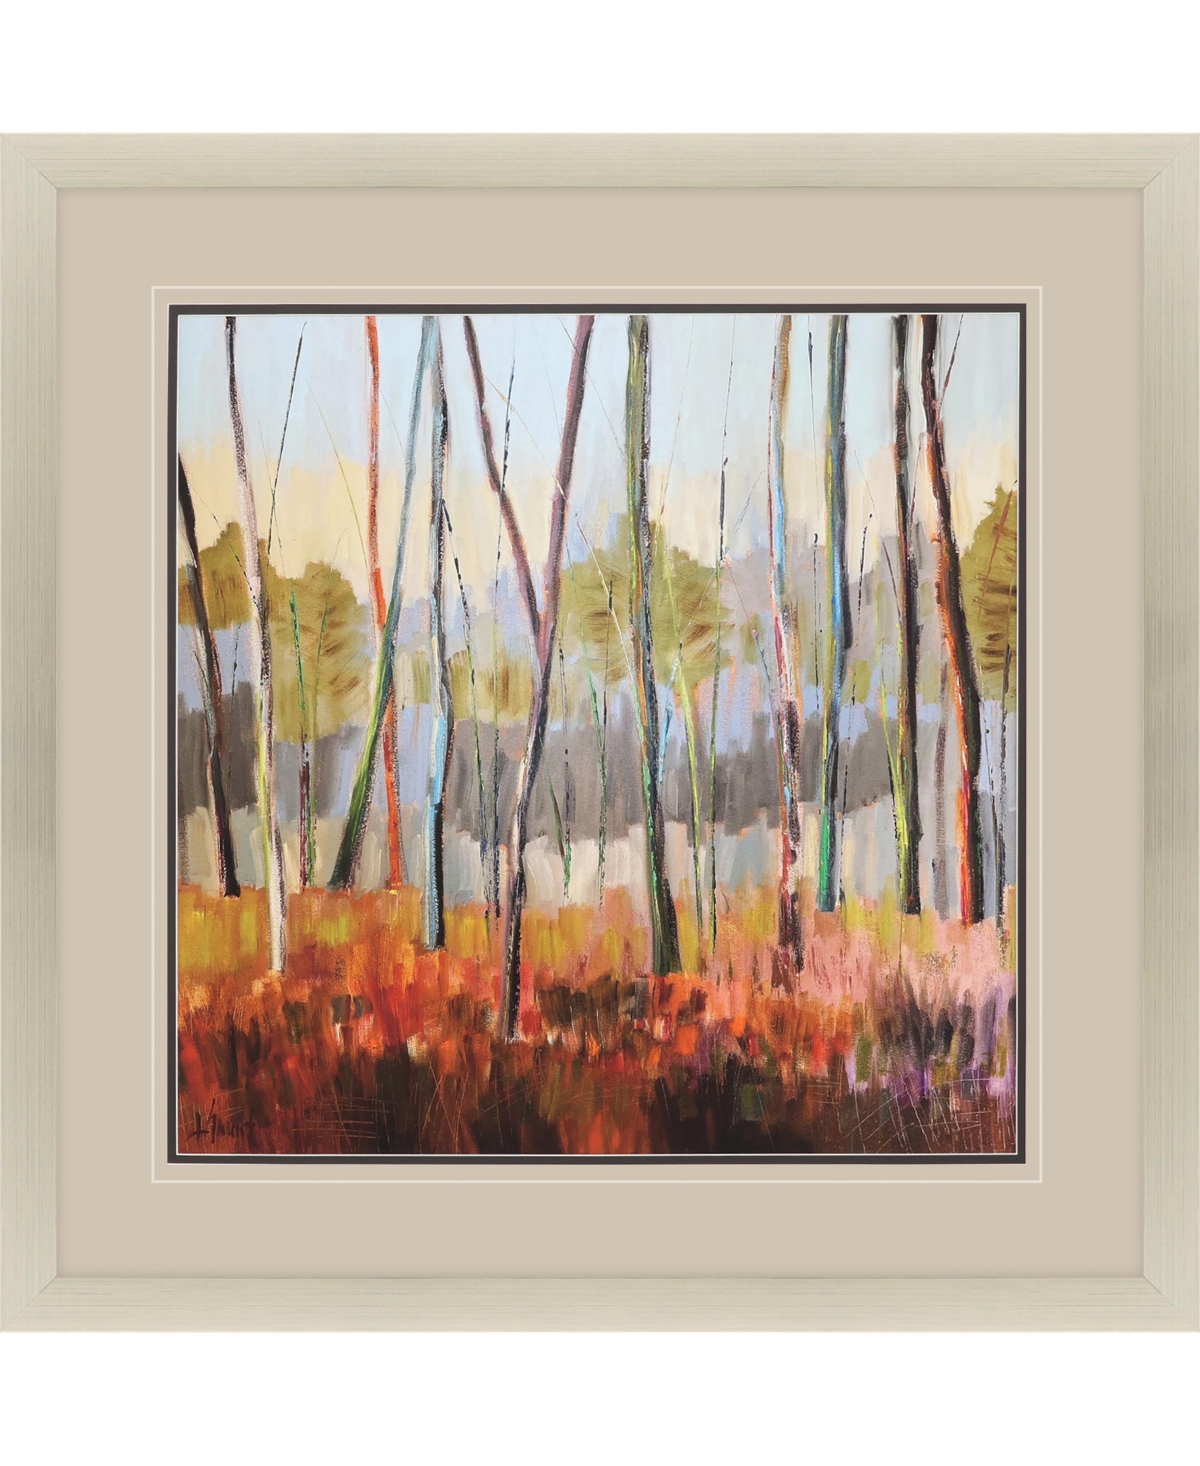 Paragon Picture Gallery Signs Of Autumn Framed Art In Green